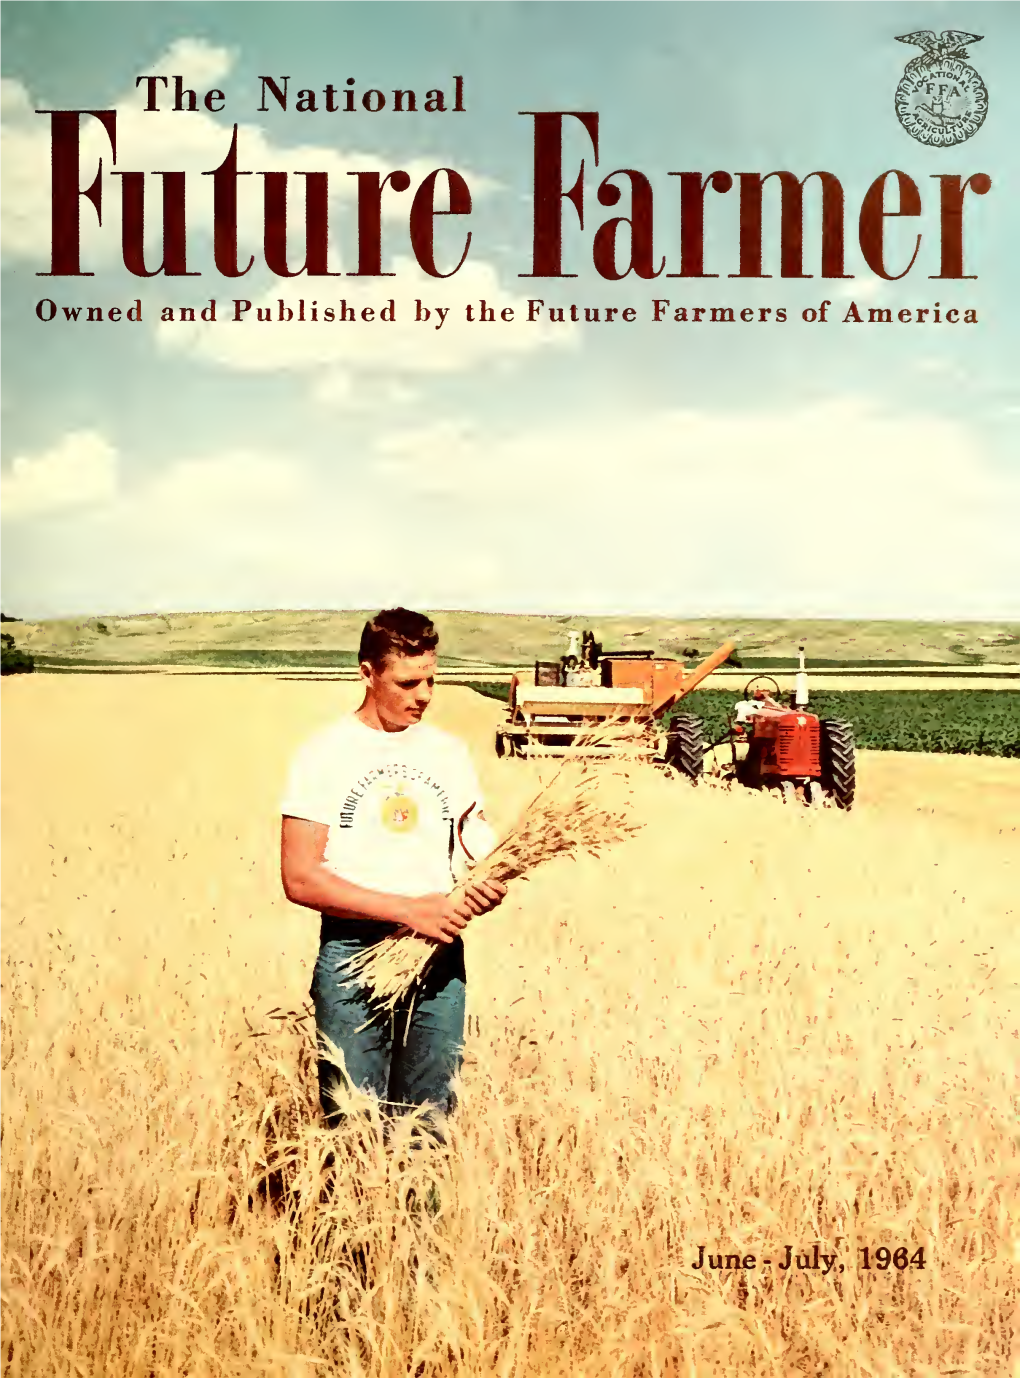 National Future Farmer Owned and Published by the Future Farmers of America